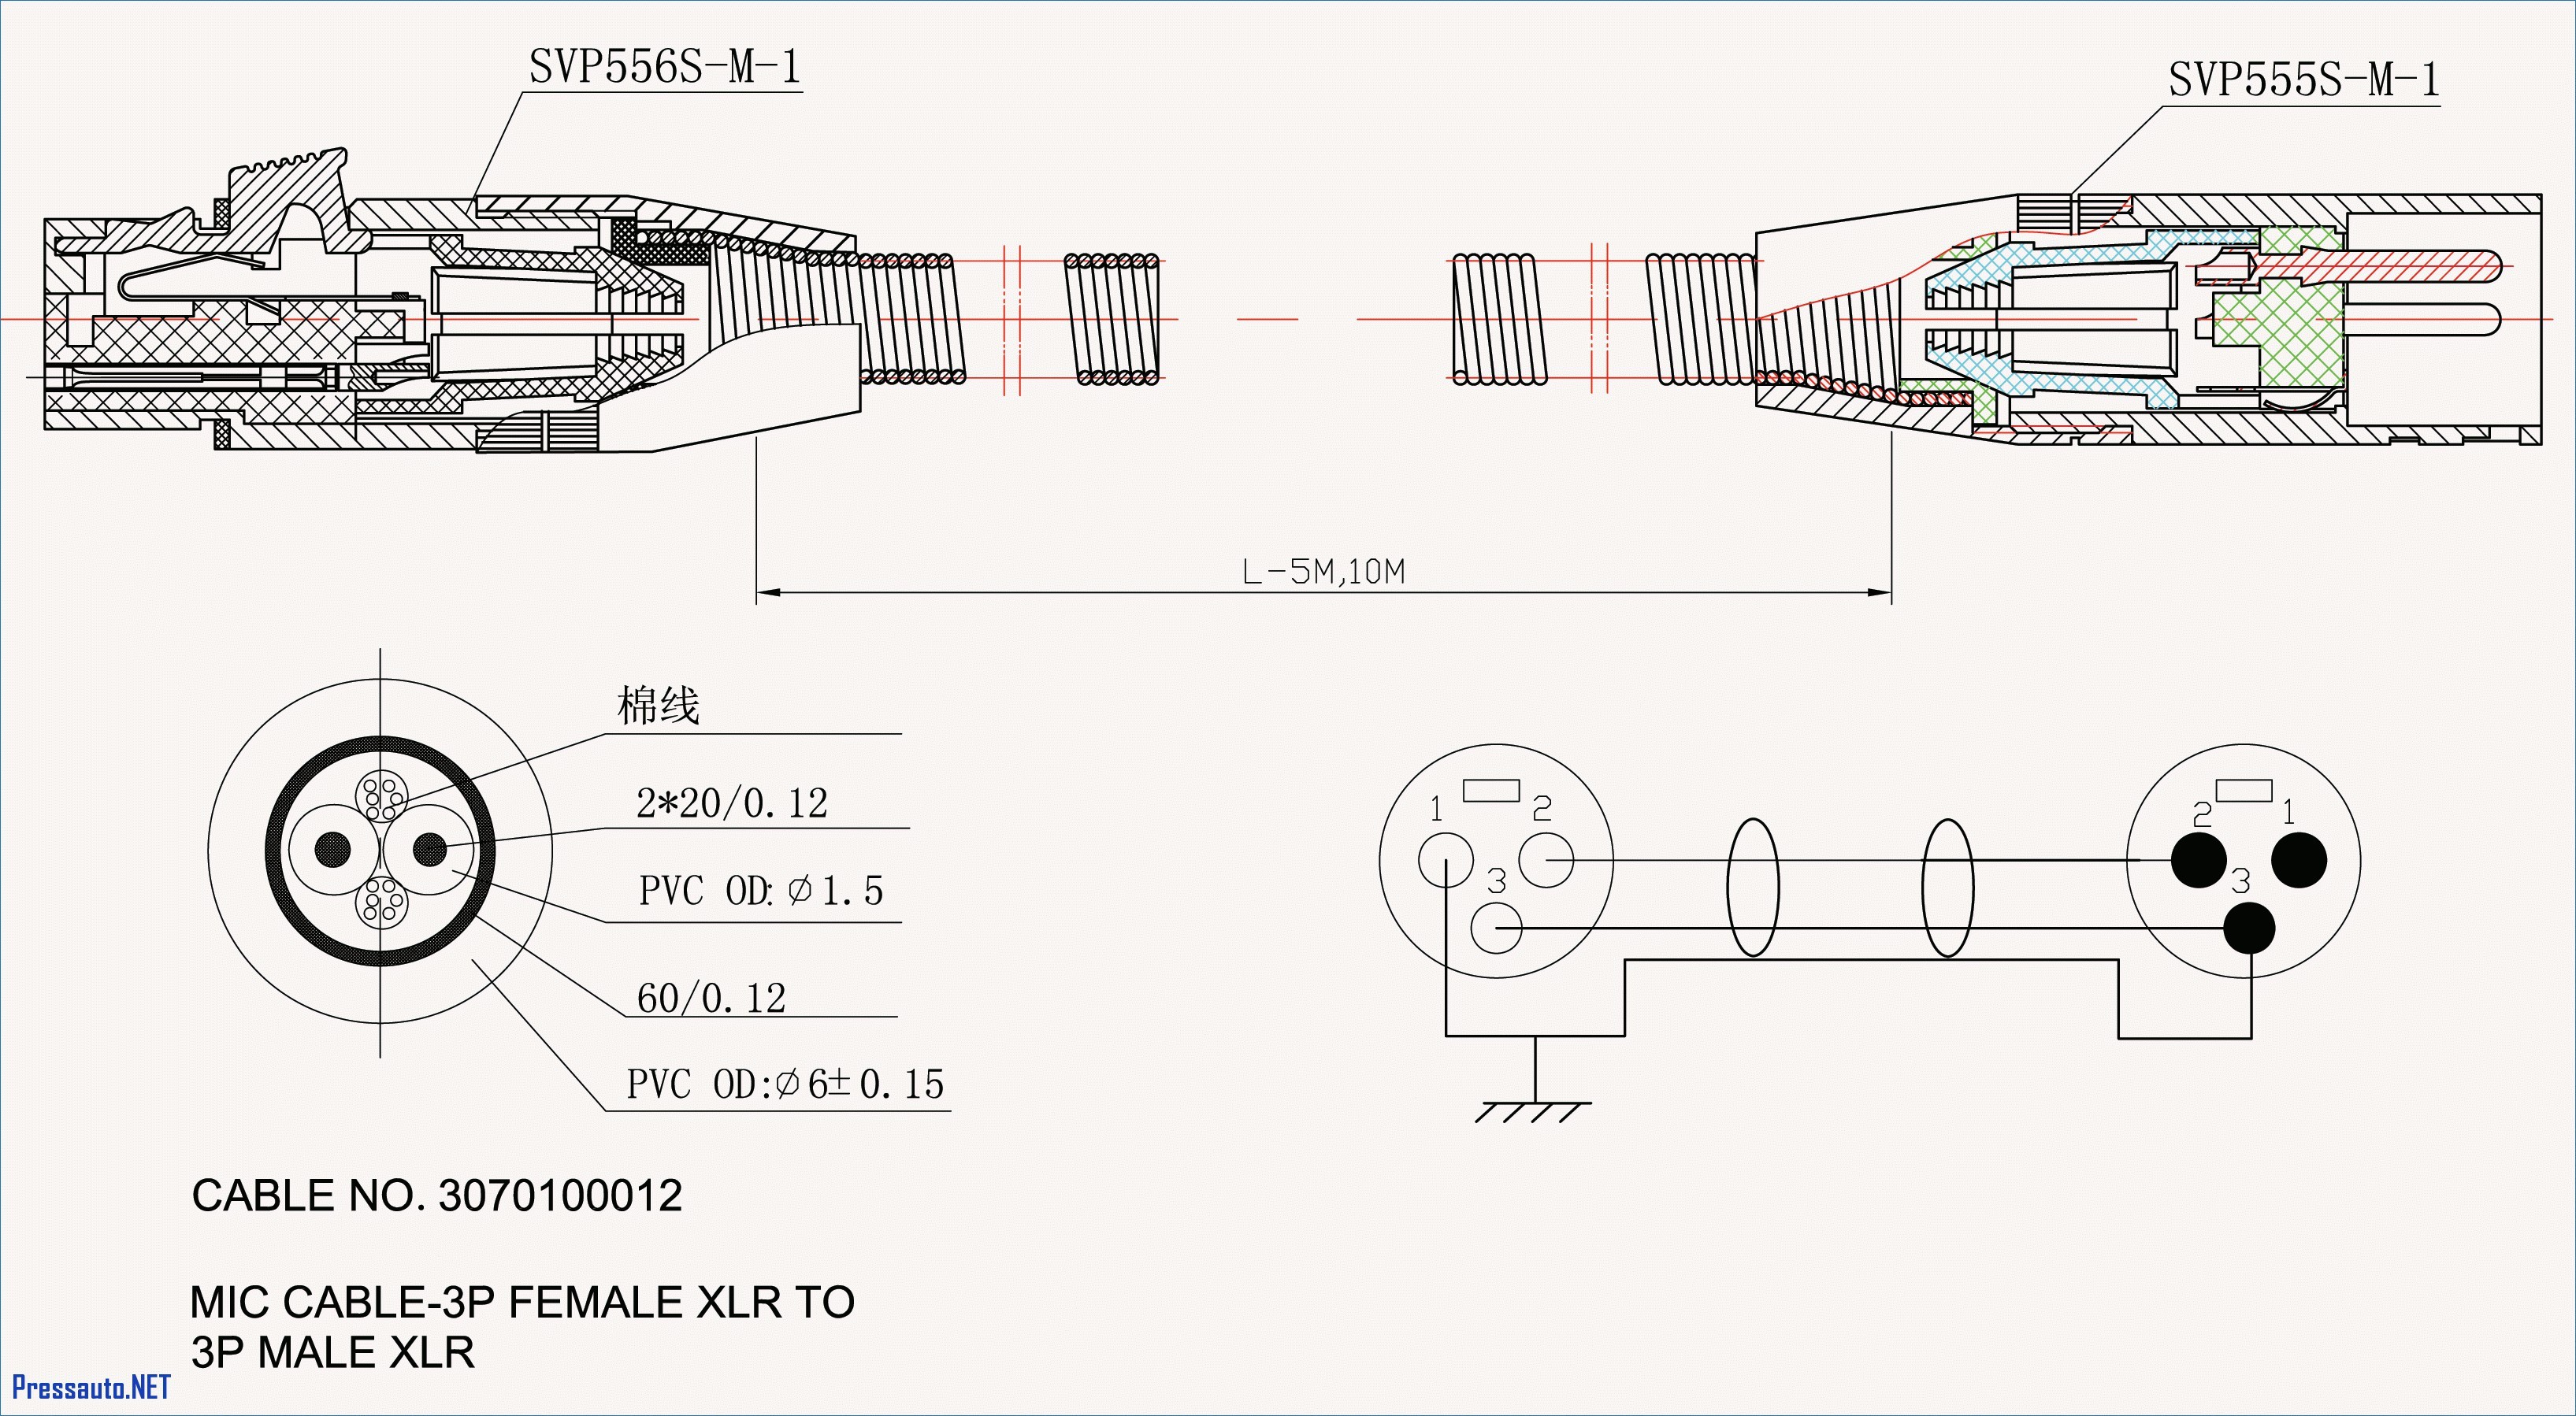 Wiring Diagram For Usb Charger New Beautiful Usb Cable Wiring